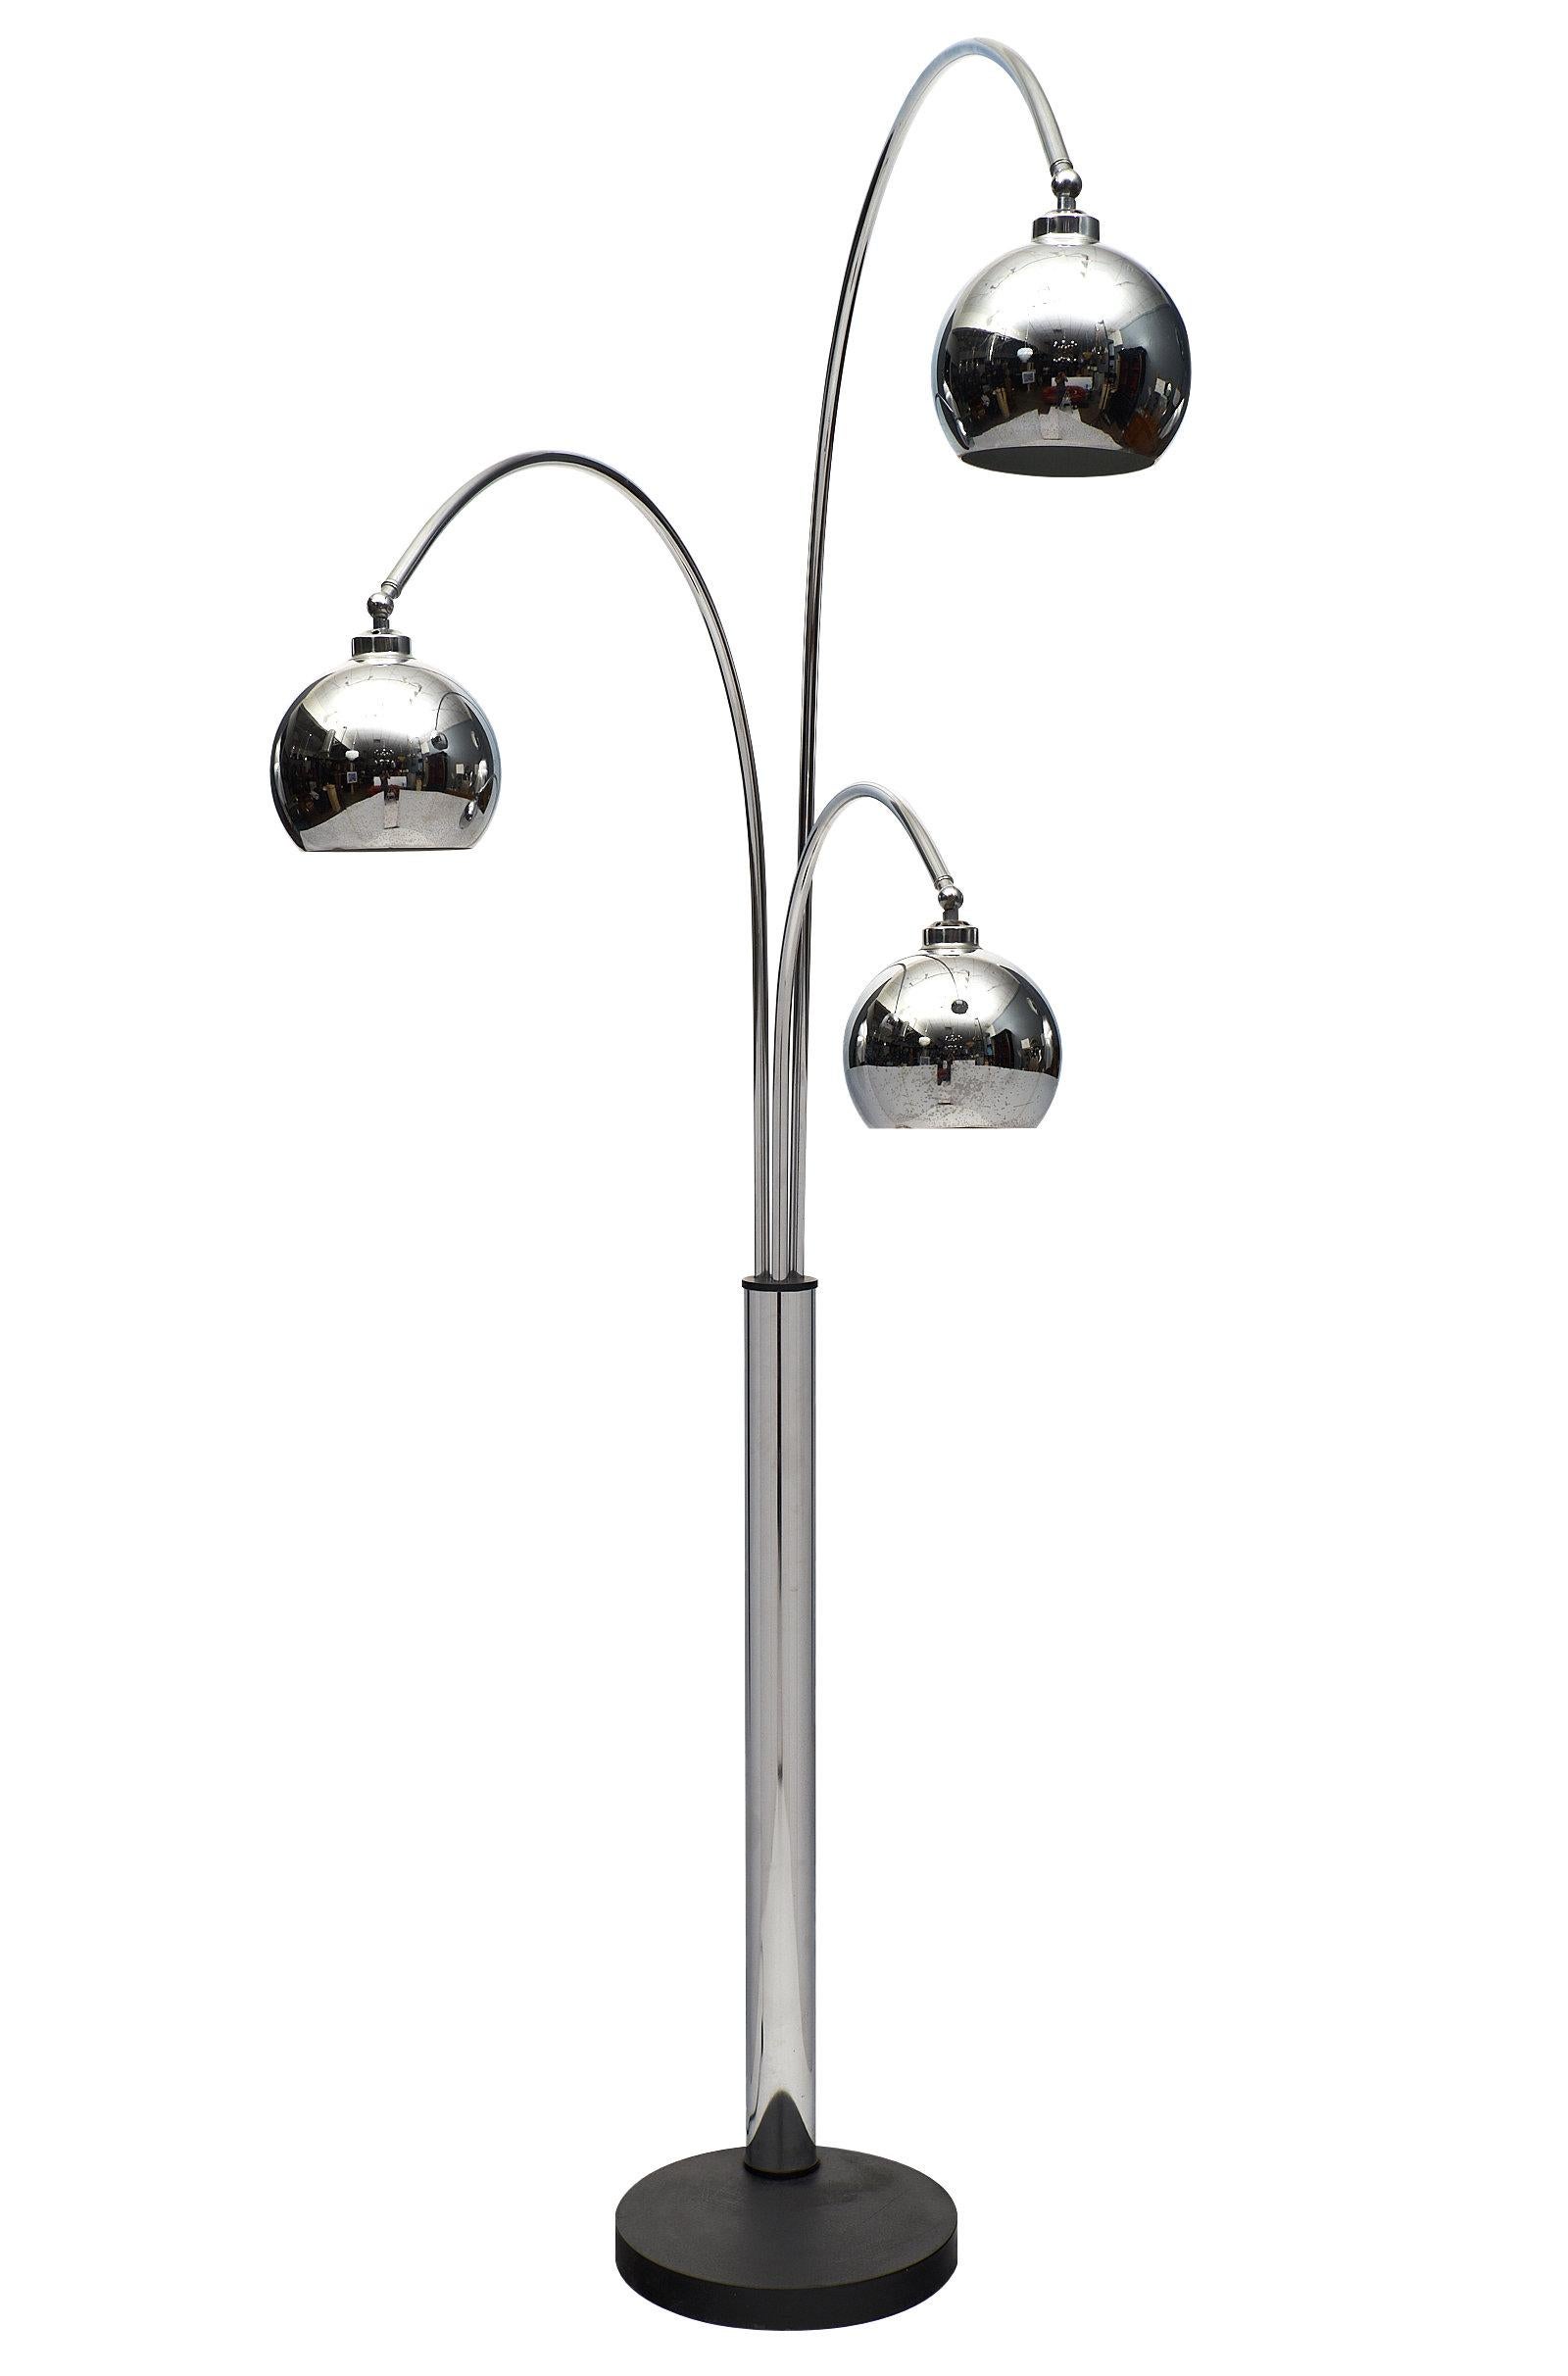 Italian vintage midcentury arc lamp with three arcing chrome lights on independently adjustable arms by Guzzini. Each chrome shade is also adjustable up and down. Rewired for the US. This iconic floor lamp is the perfect loft element.